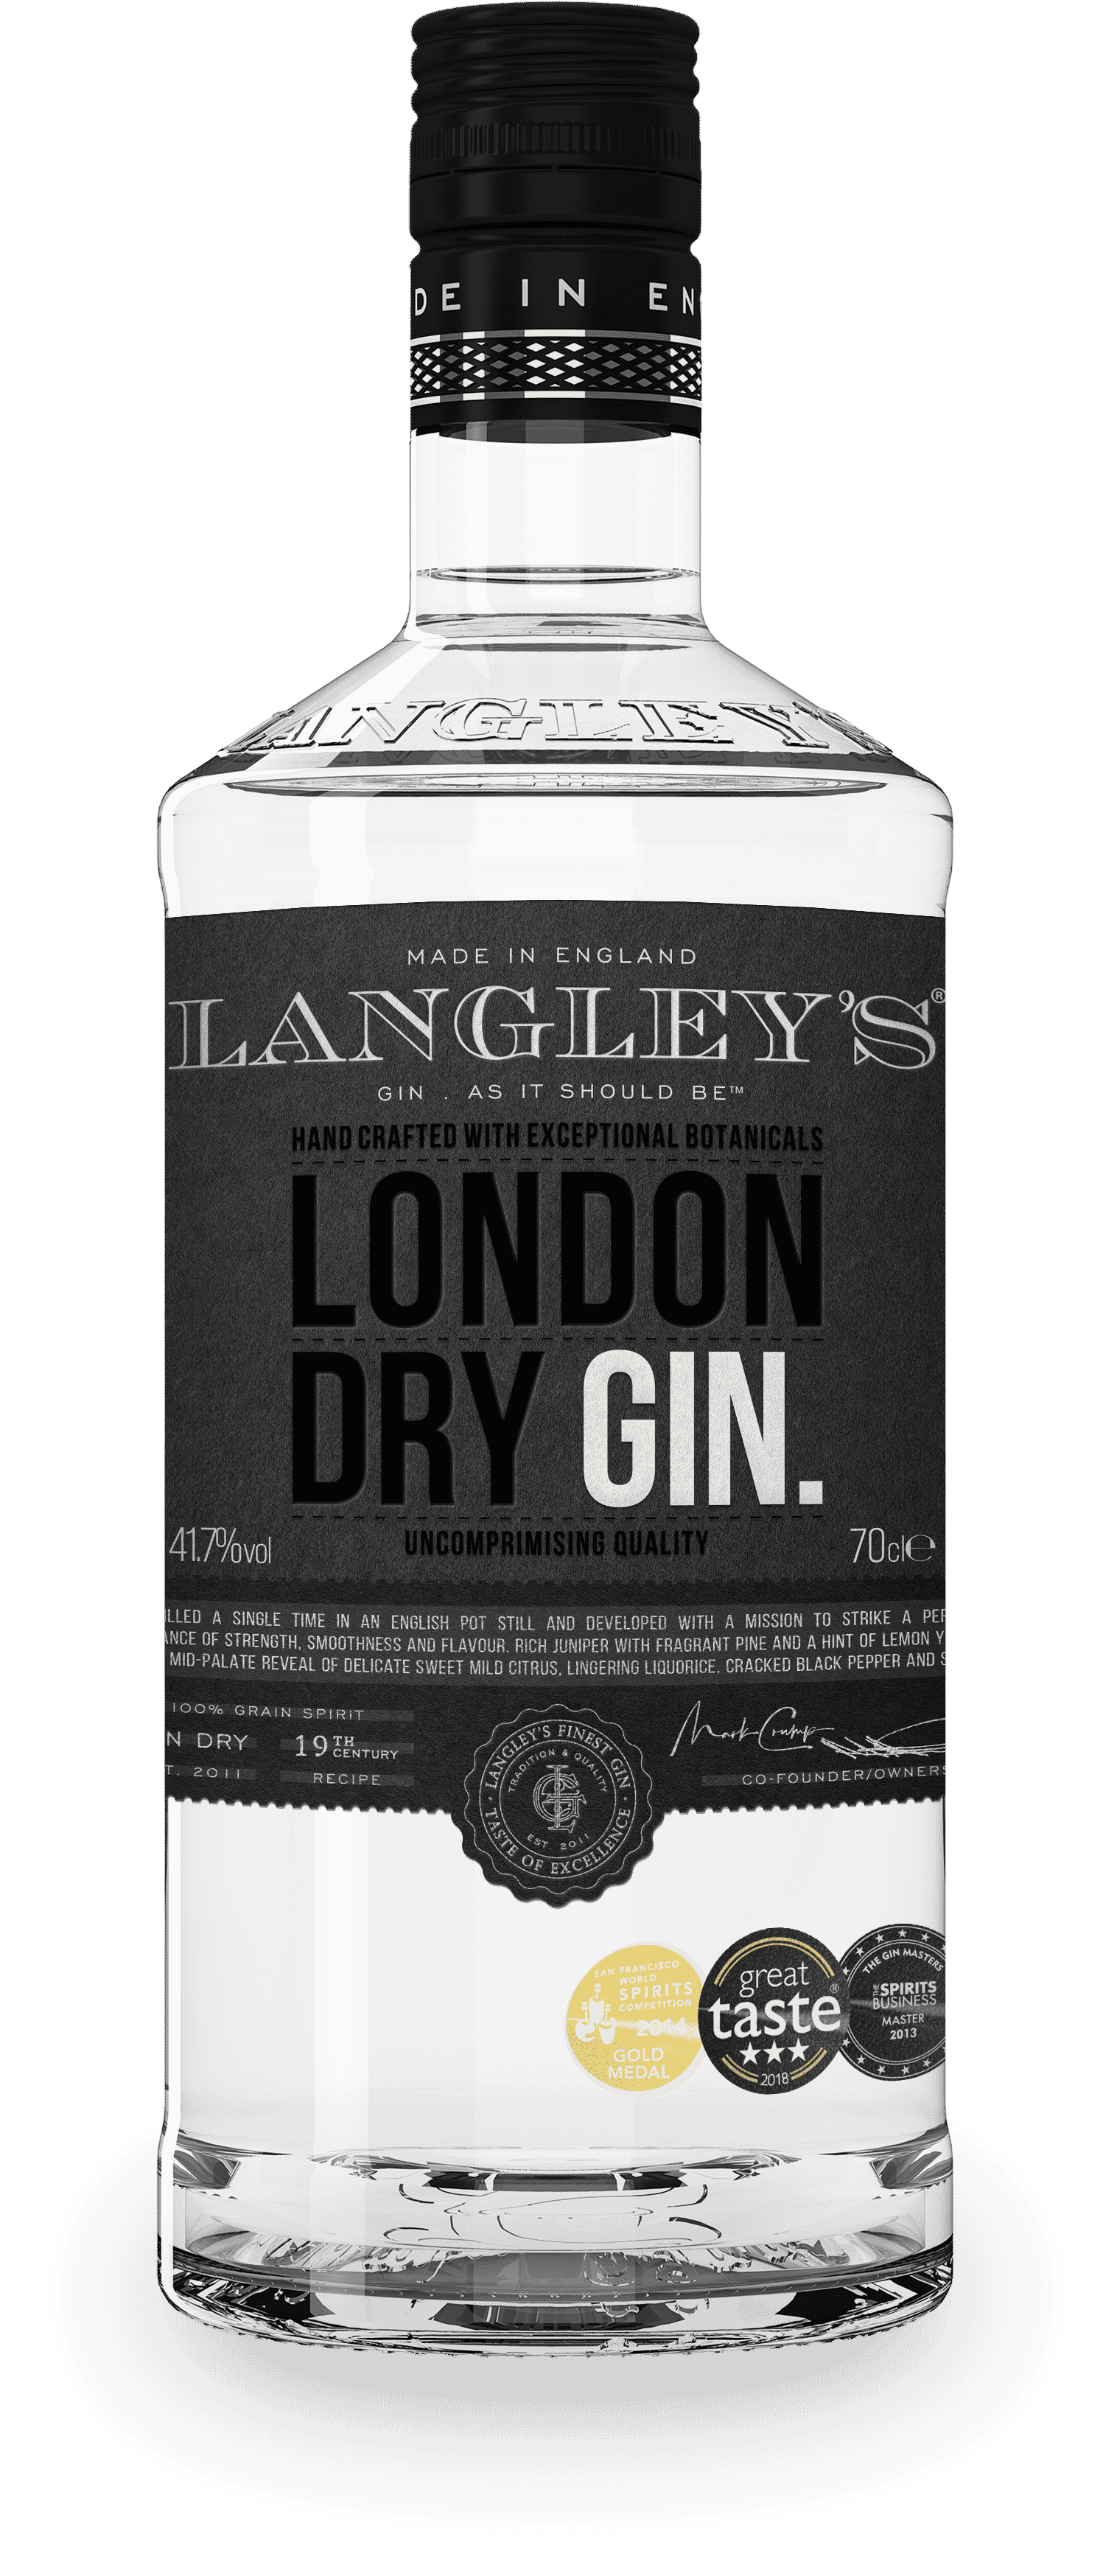 Langleys london dry gin bouteille